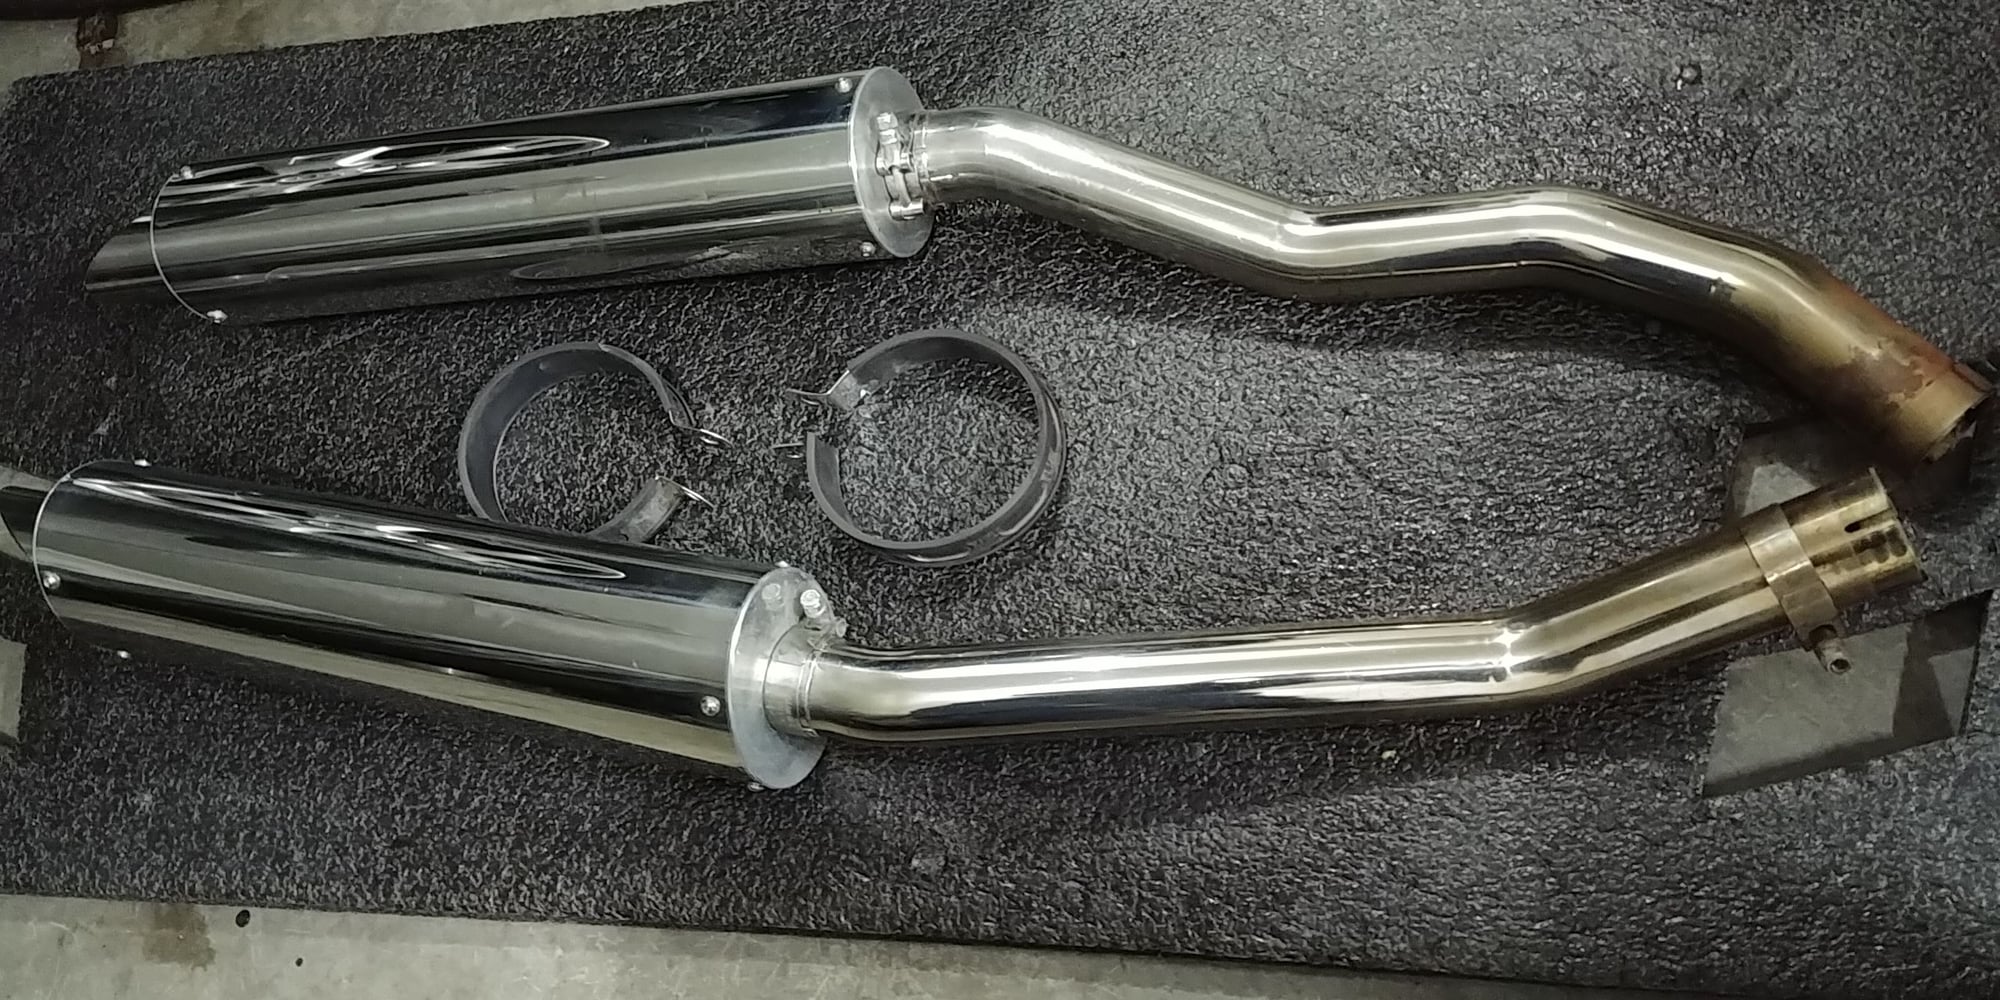  - Zx14 aftermarket slip on exhaust. - Plover, WI 54467, United States